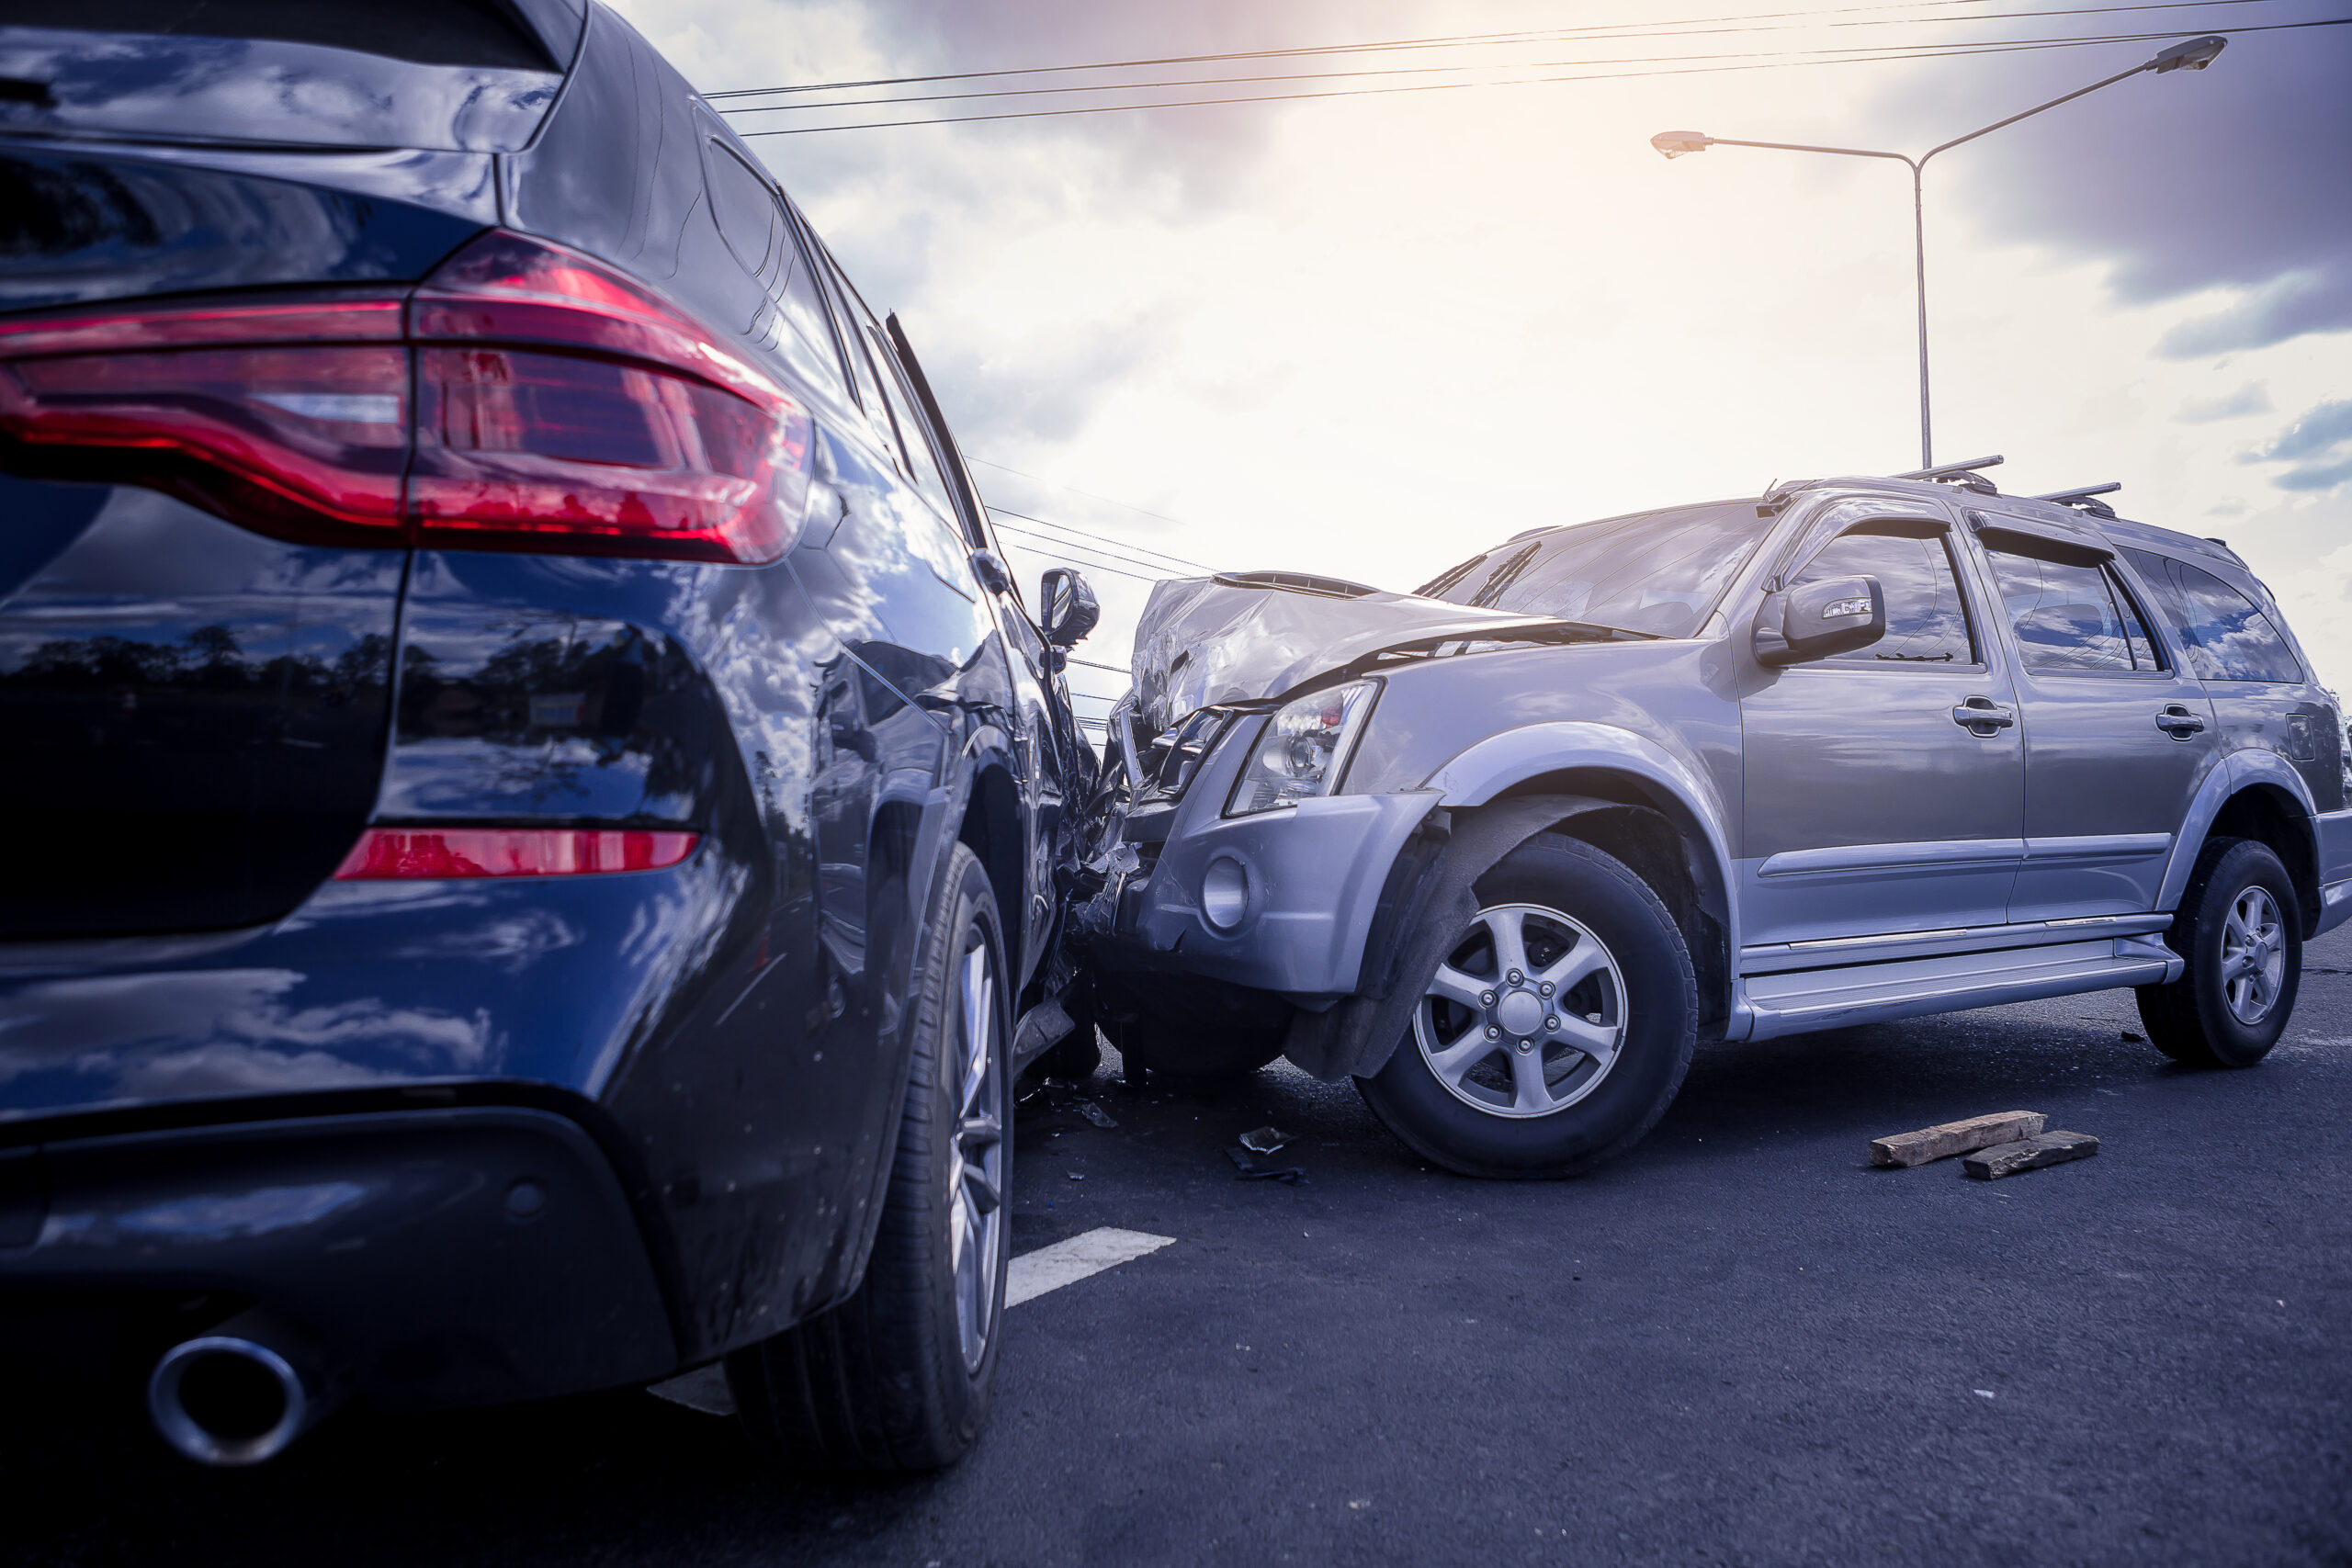 two automobiles in a head on collision for an automobile accident fatality blog